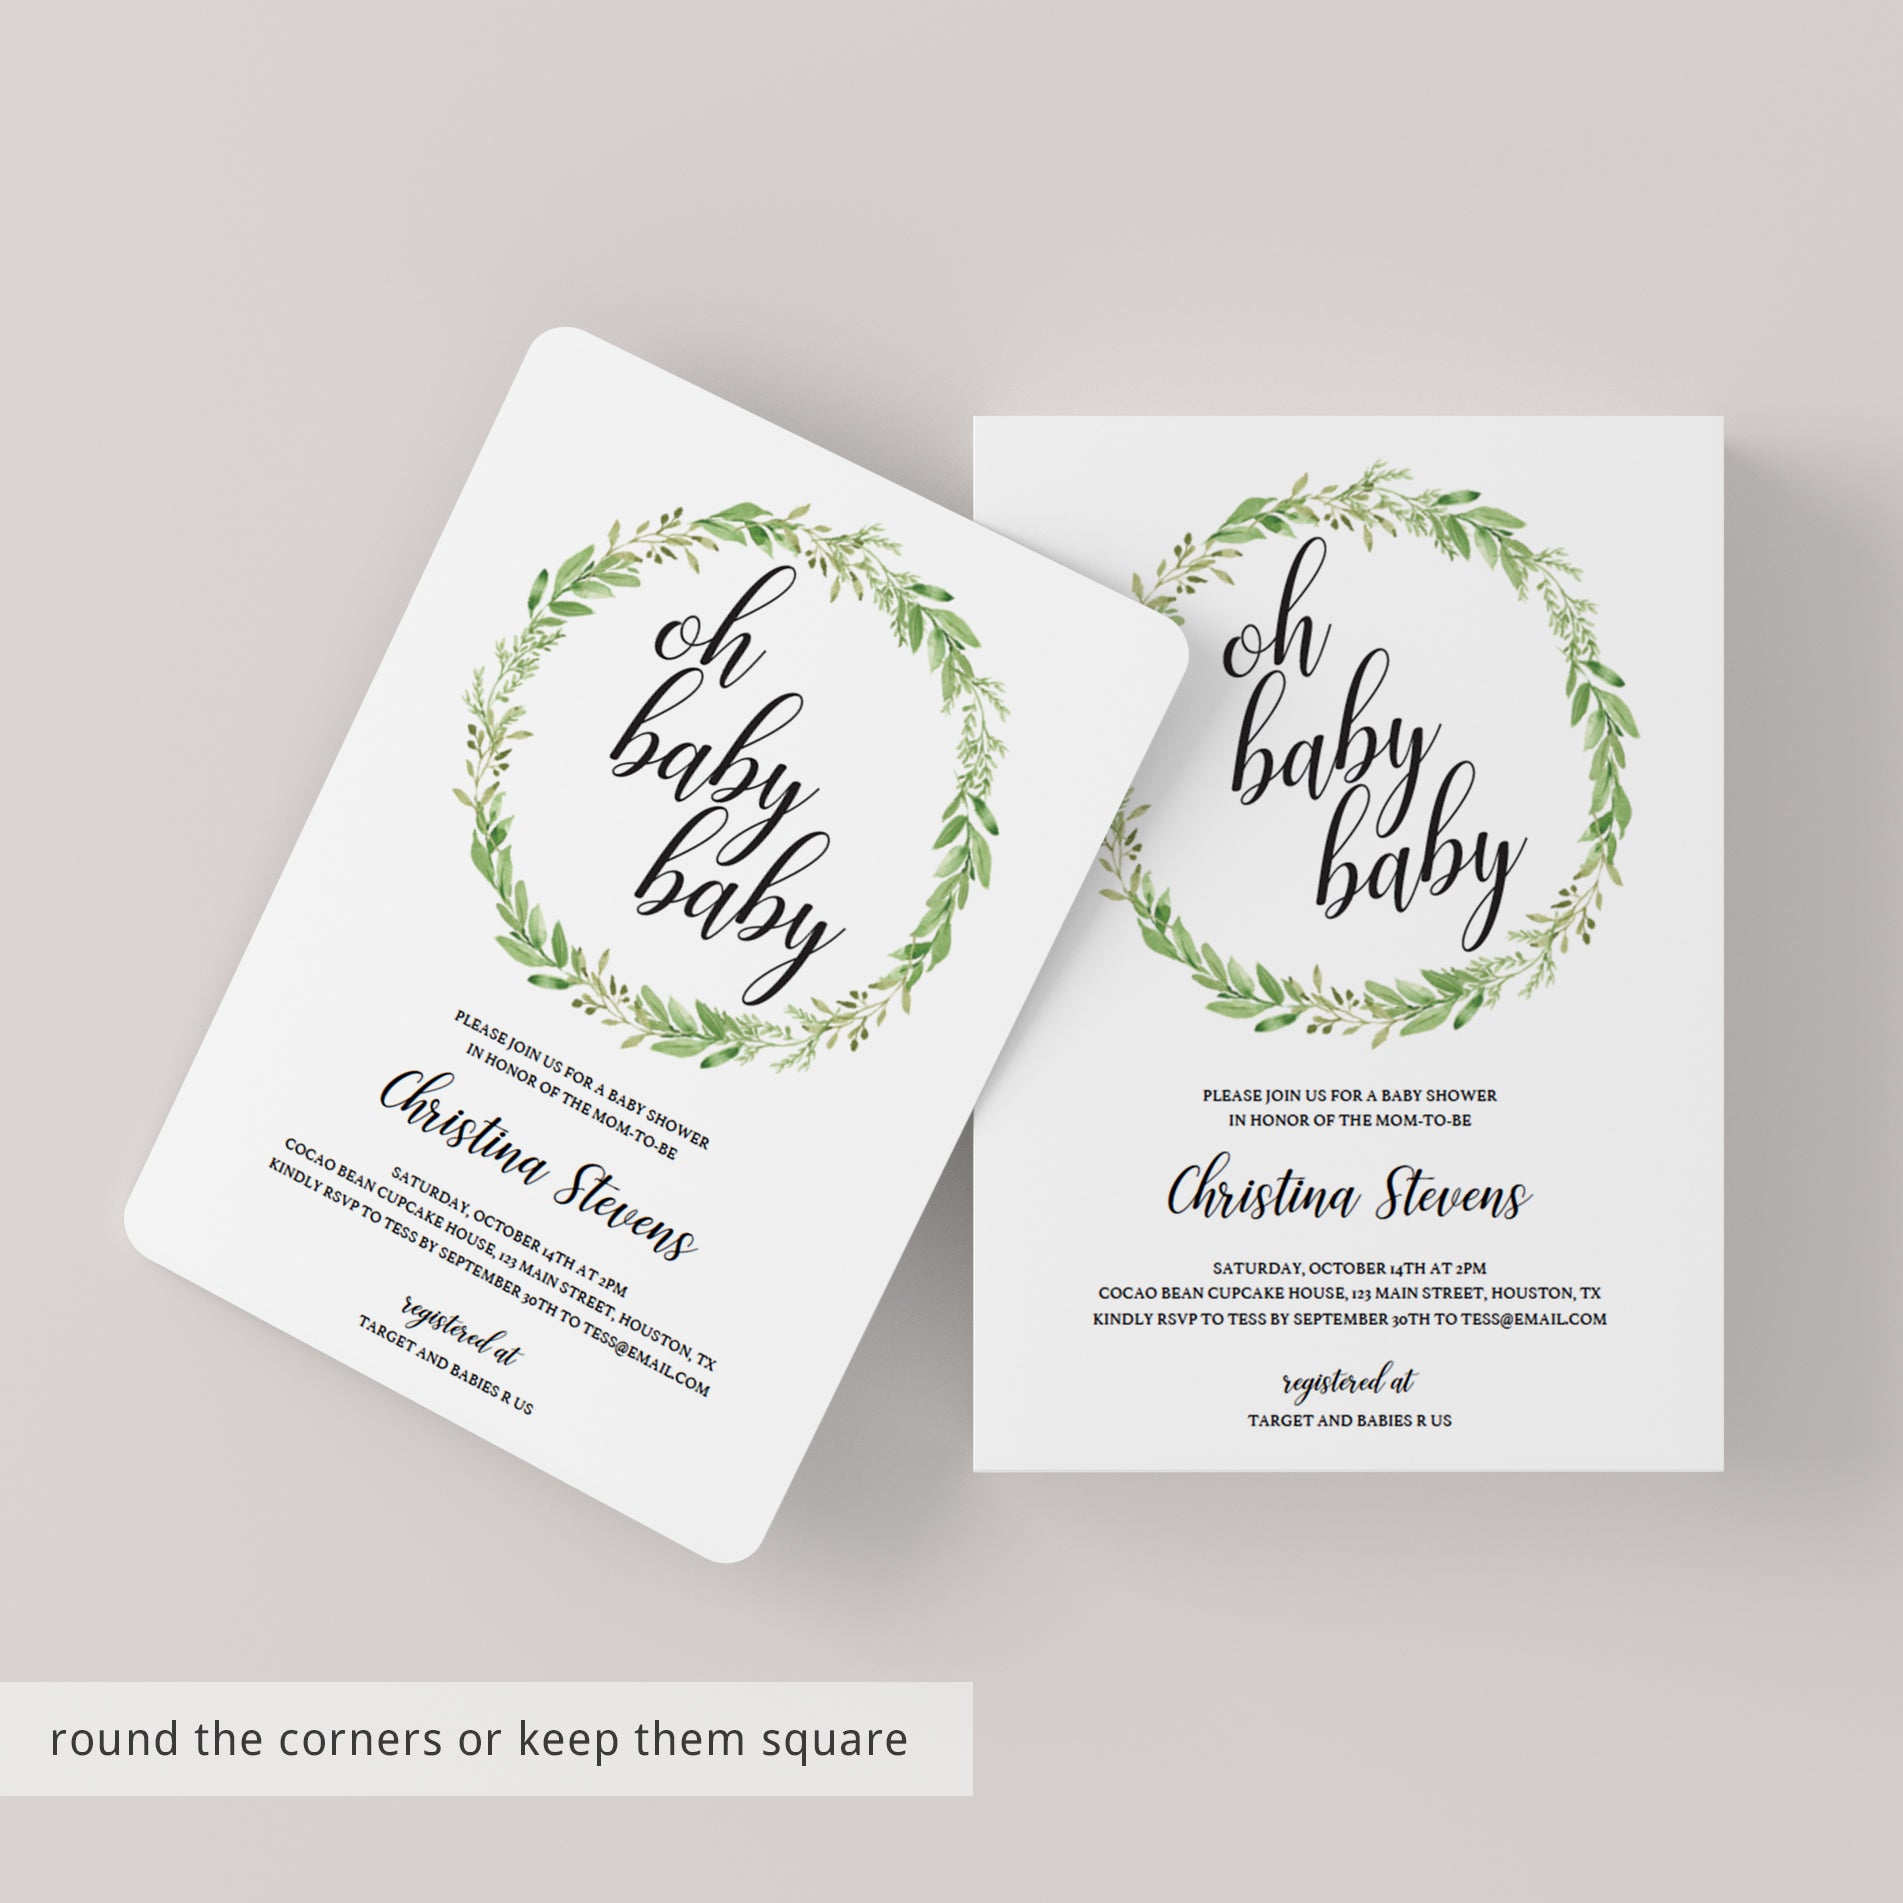 Editable Baby Shower Invite for twins by LittleSizzle